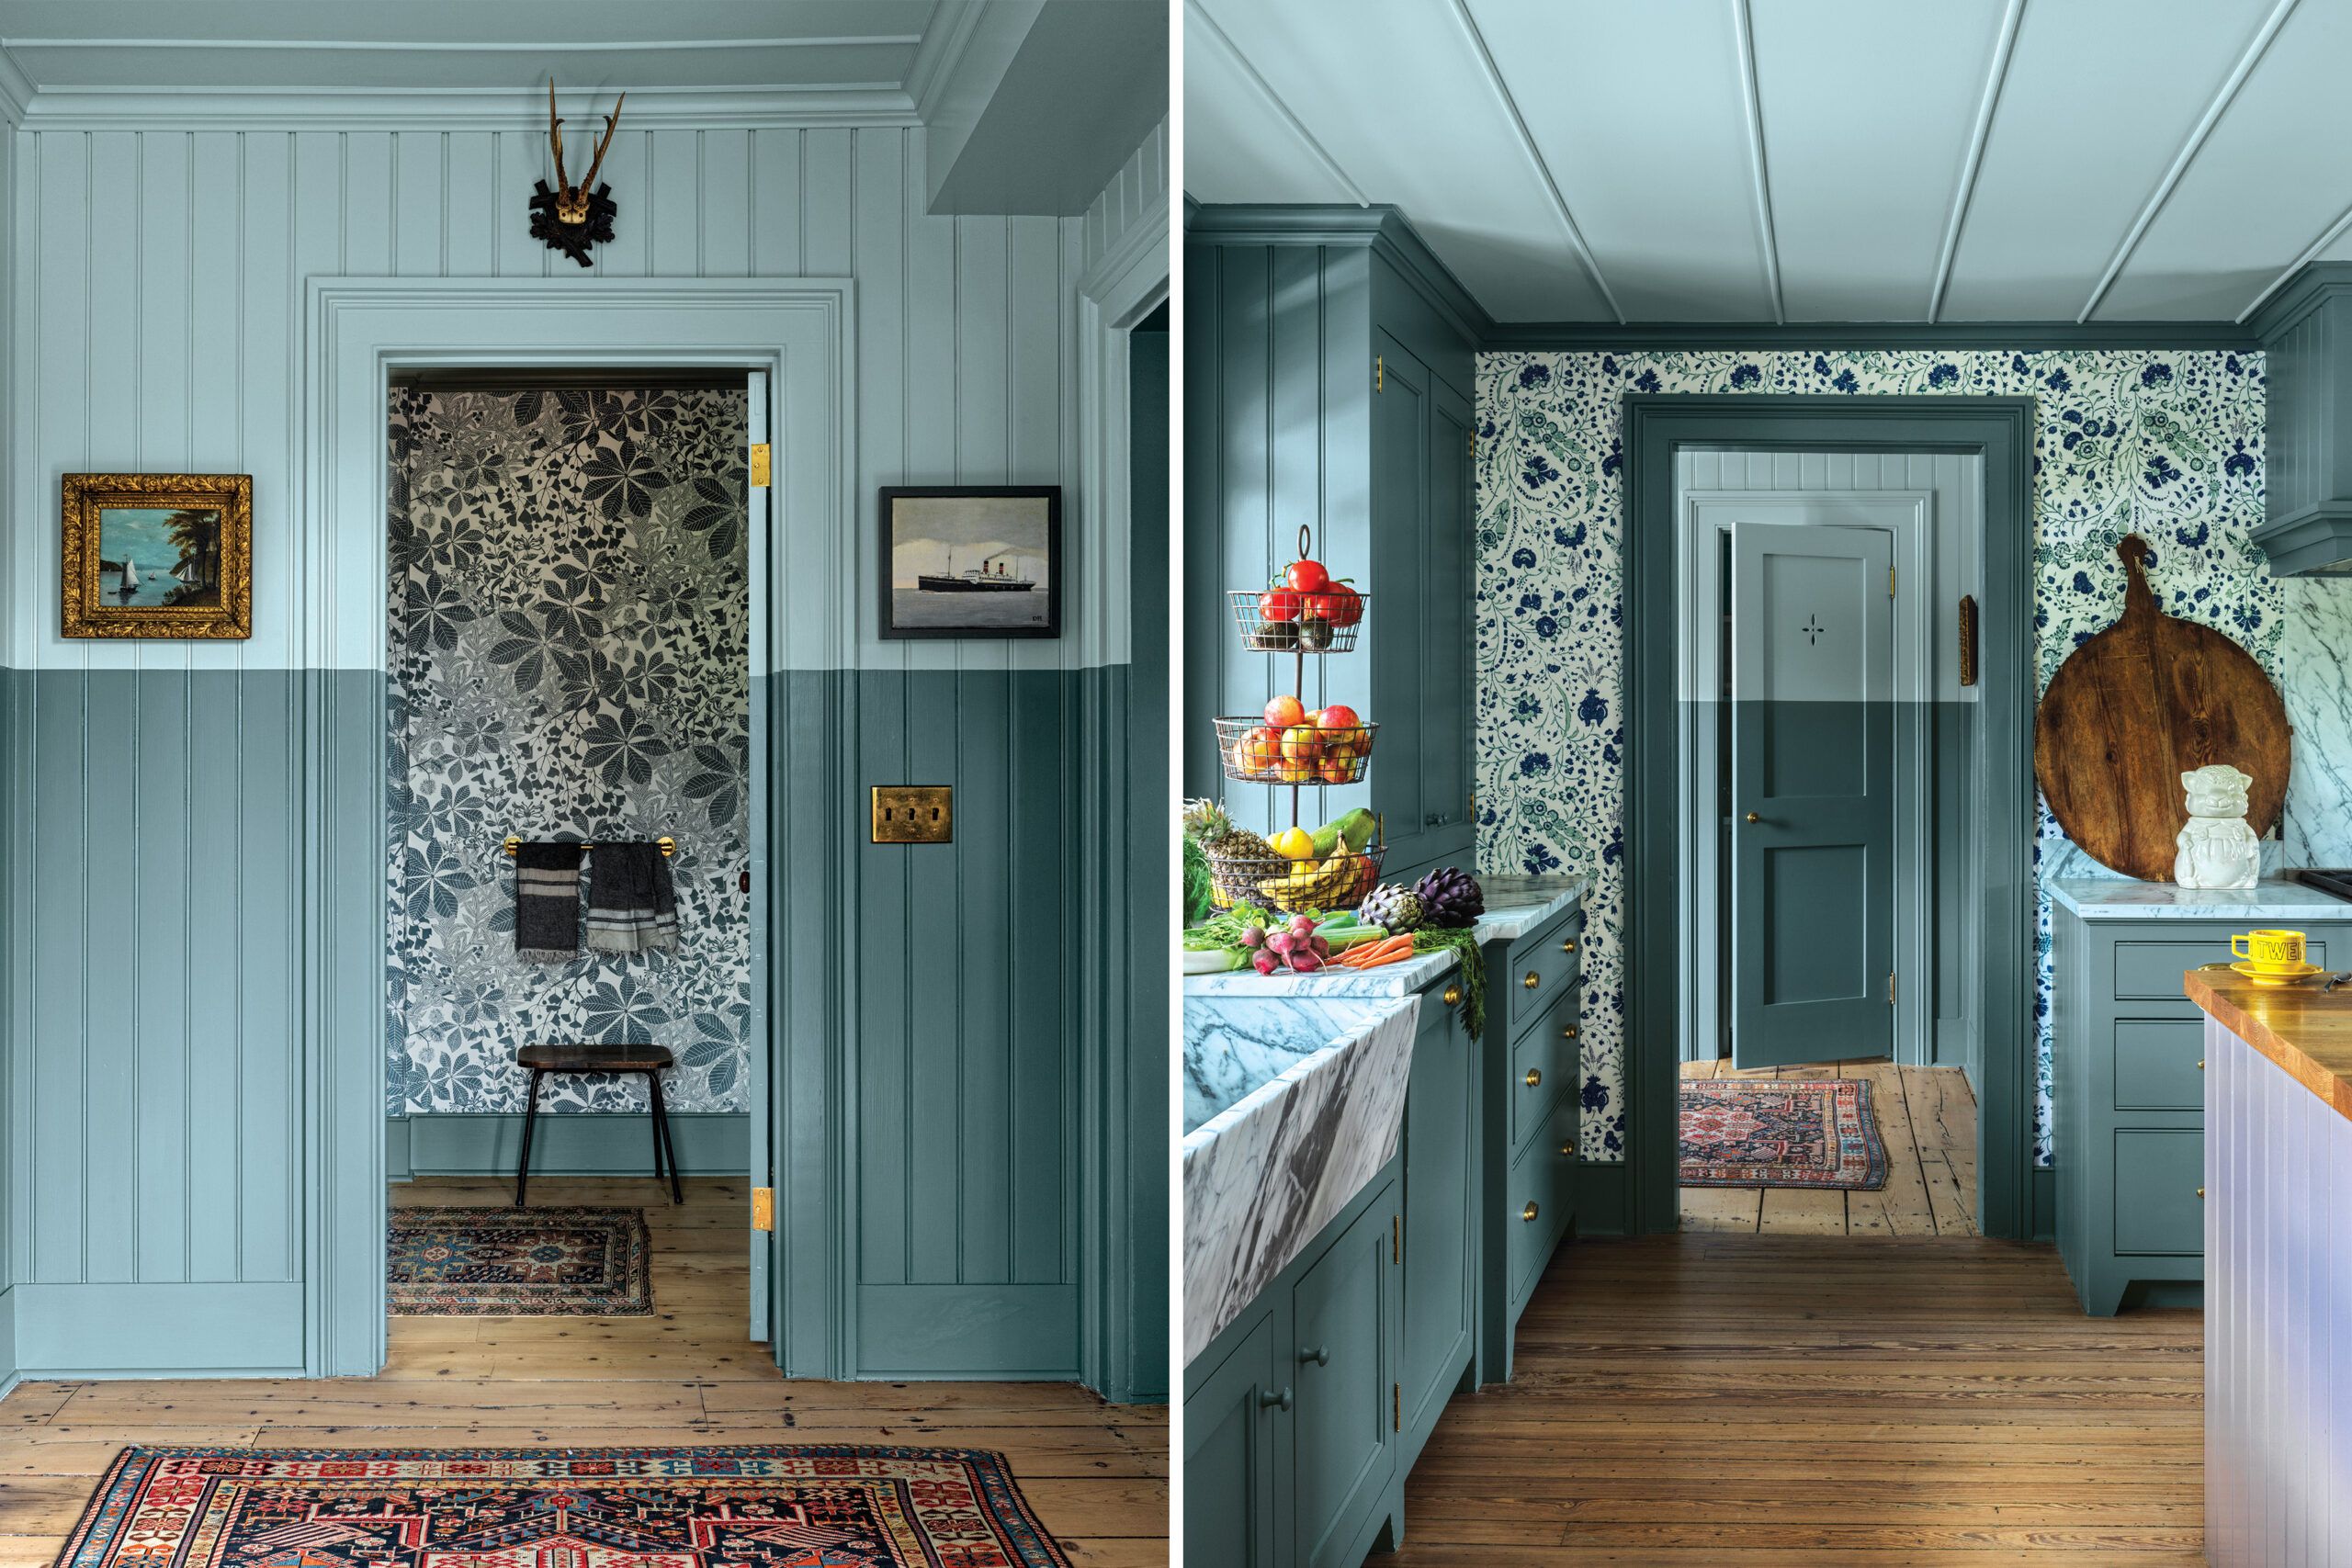 Two images of a two tone room